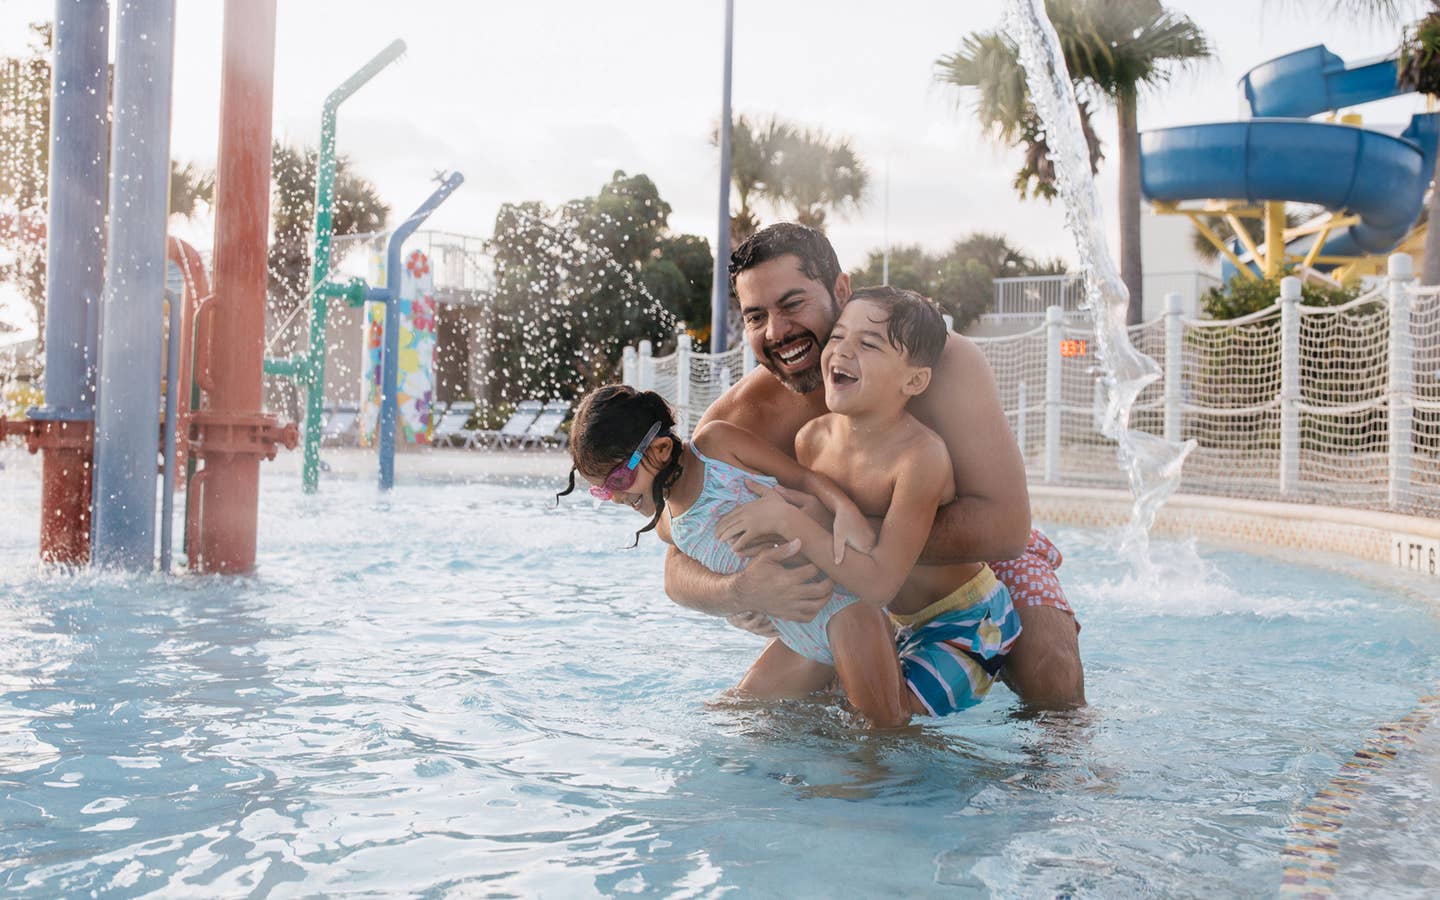 Father and kids playing in a pool.